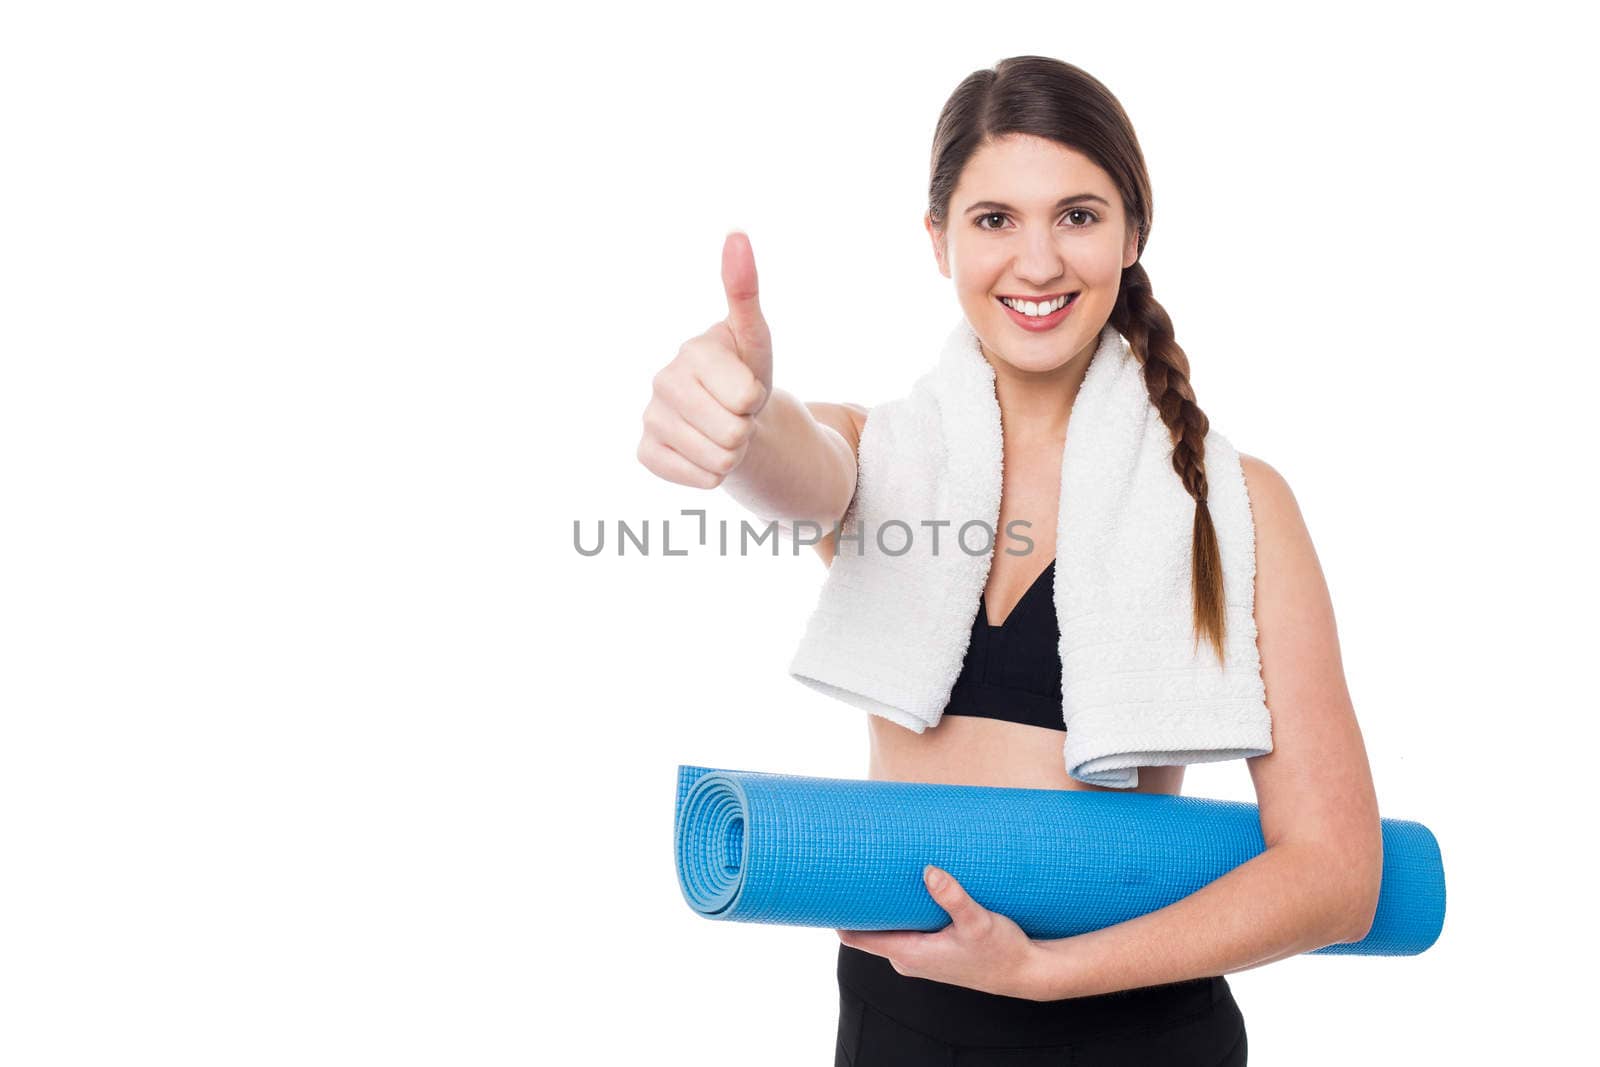 Smiling female trainer gesturing thumbs up